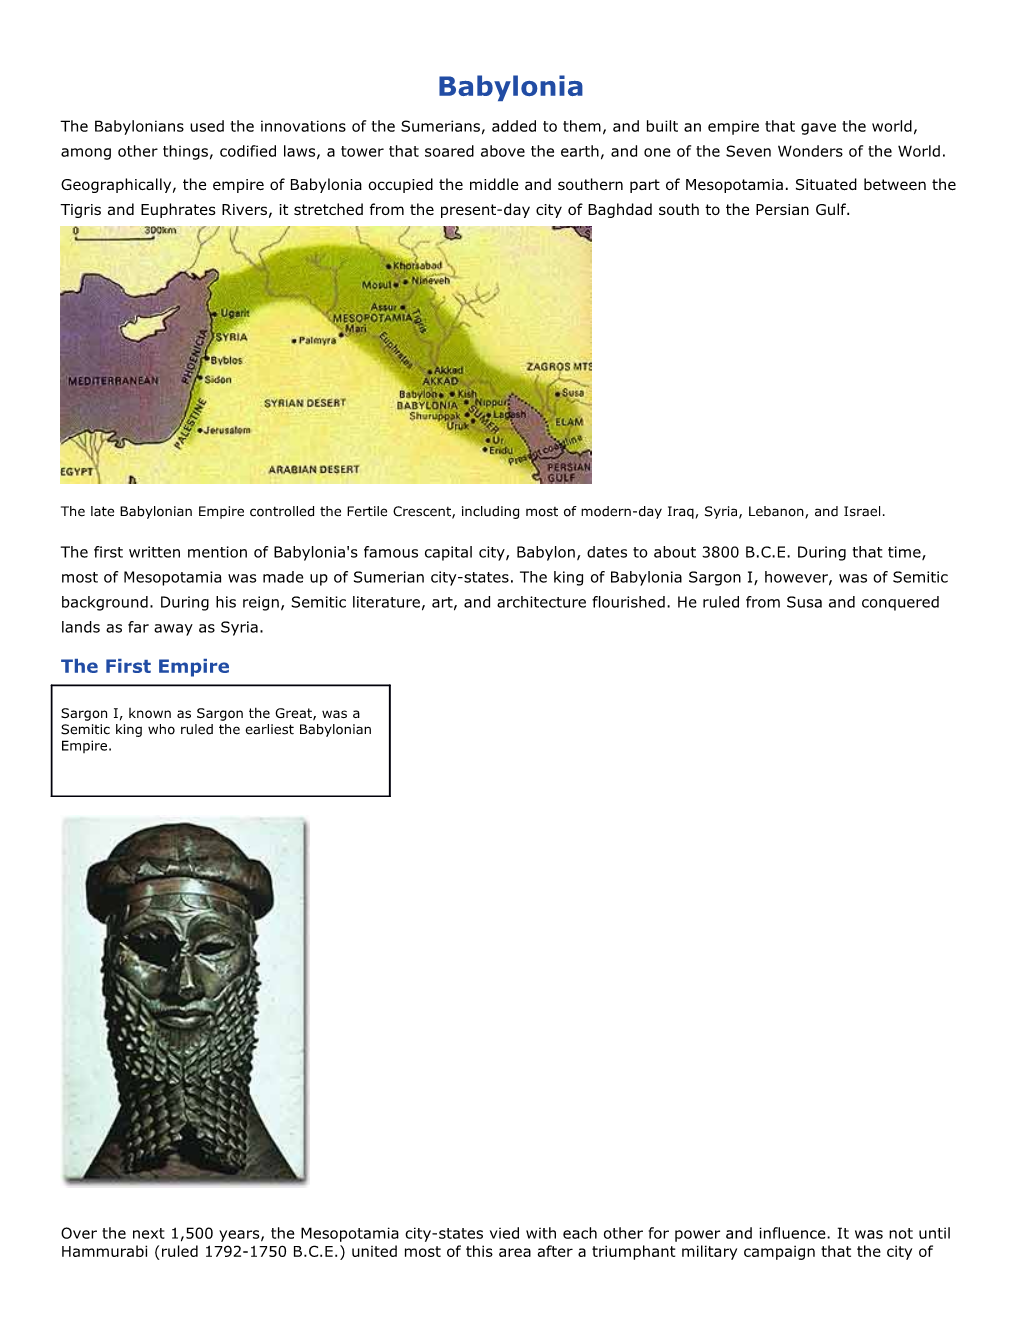 The Babylonians Used the Innovations of the Sumerians, Added to Them, and Built an Empire